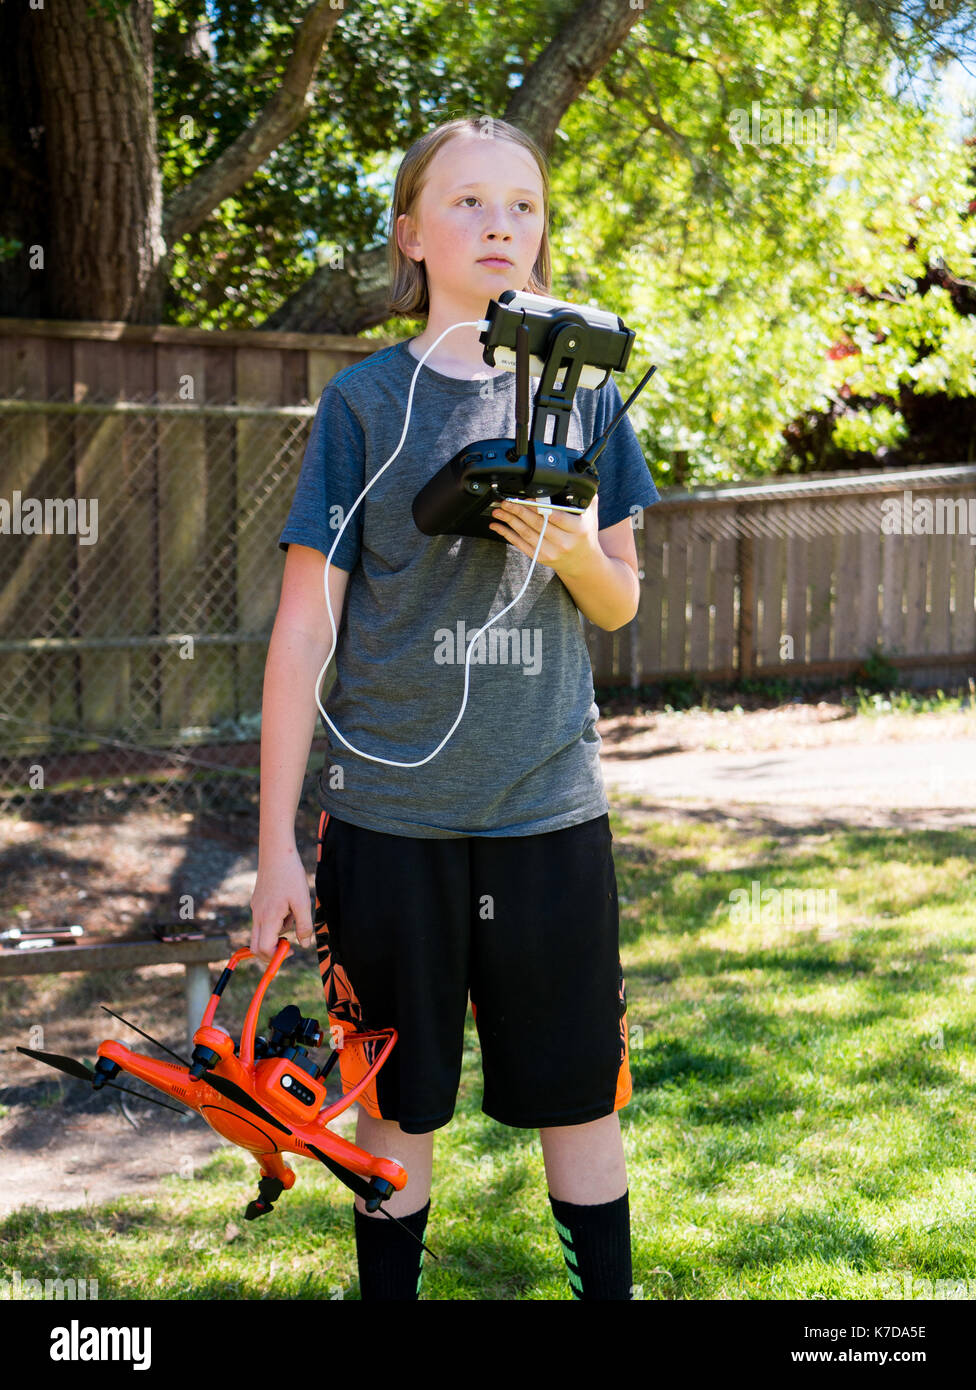 Boy looking away while holding remote control and quadcopter at playground Stock Photo